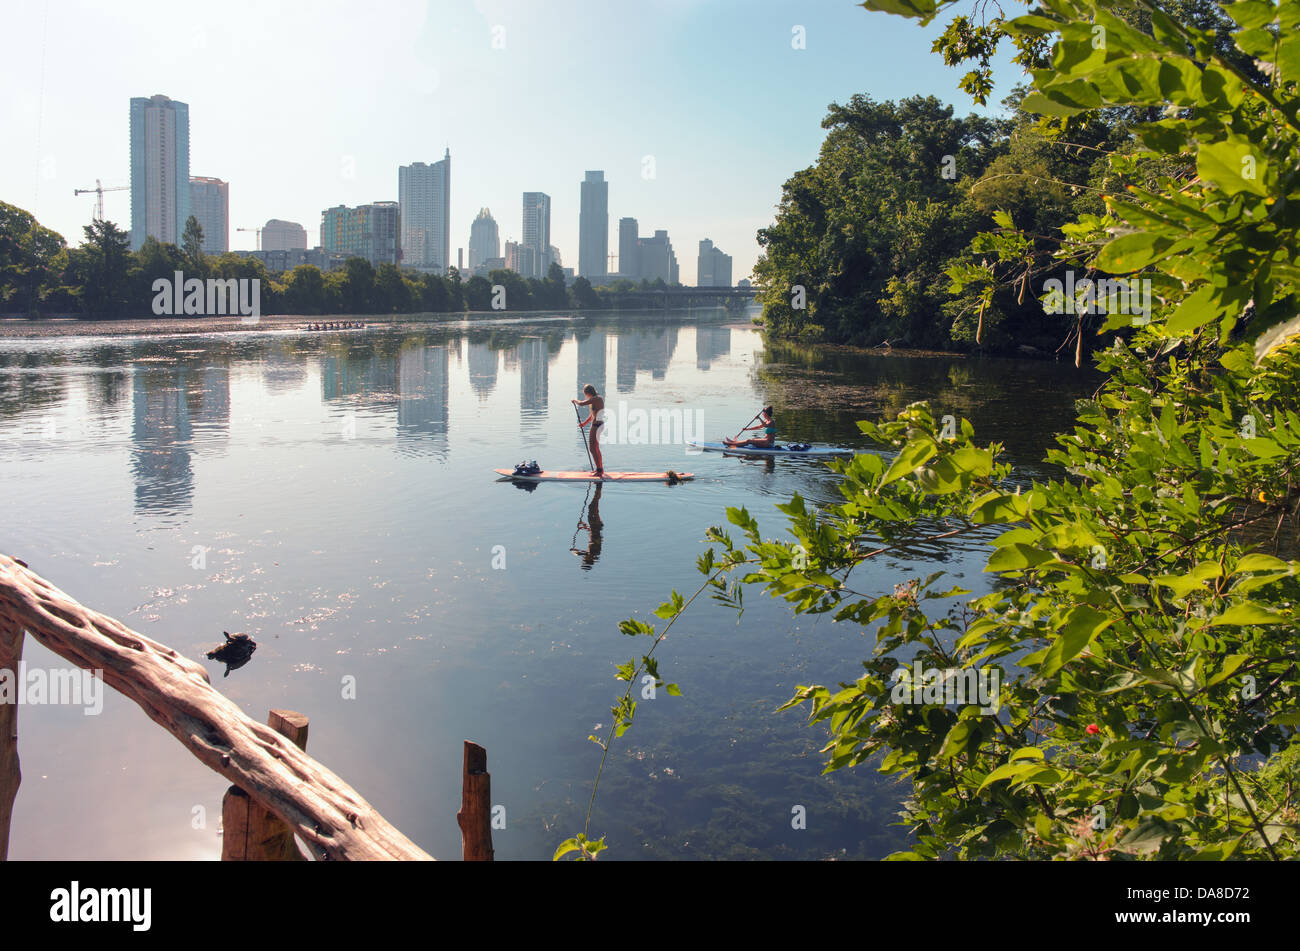 Two young females maneuver their paddle boards on Ladybird Lake in Austin, Texas. Downtown Austin is visible in the background. Stock Photo